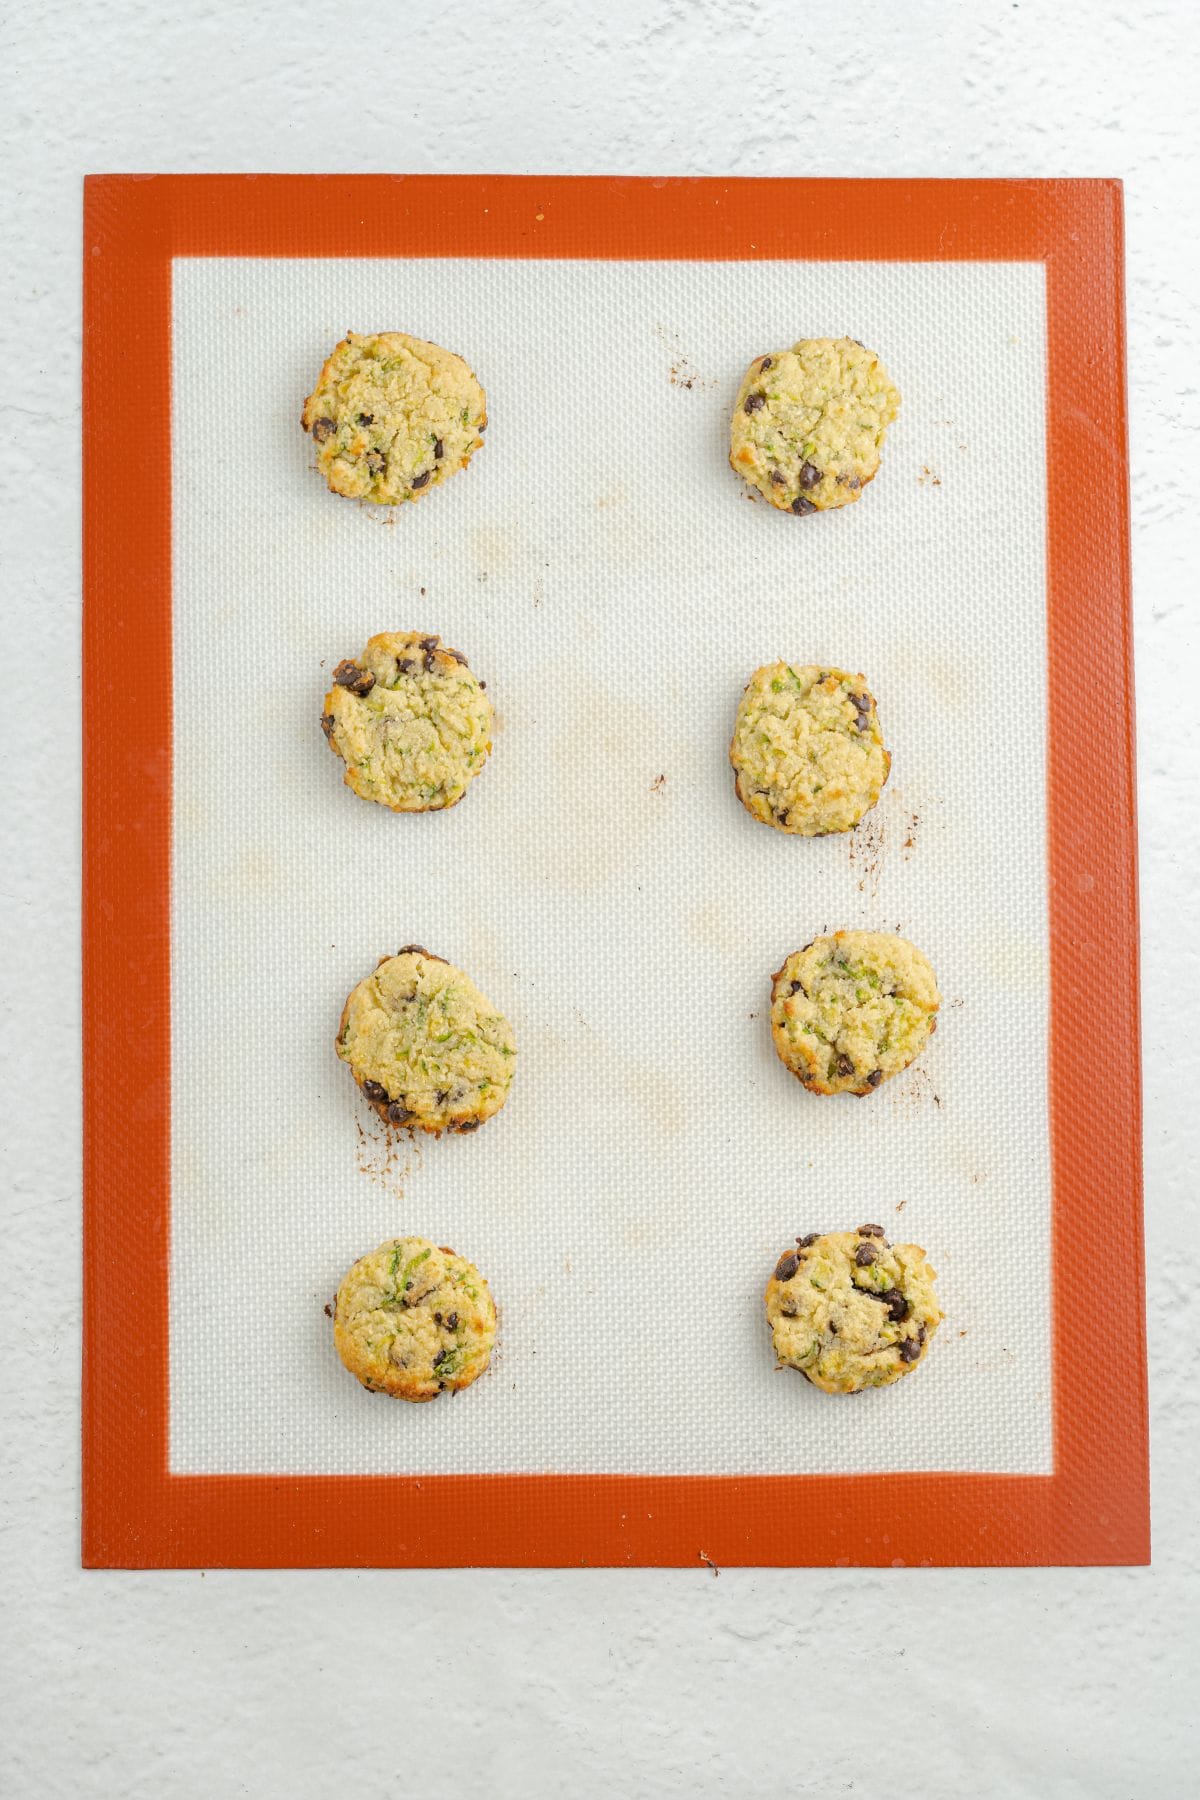 Almond Flour and Zucchini Chocolate Chip Cookies step 14